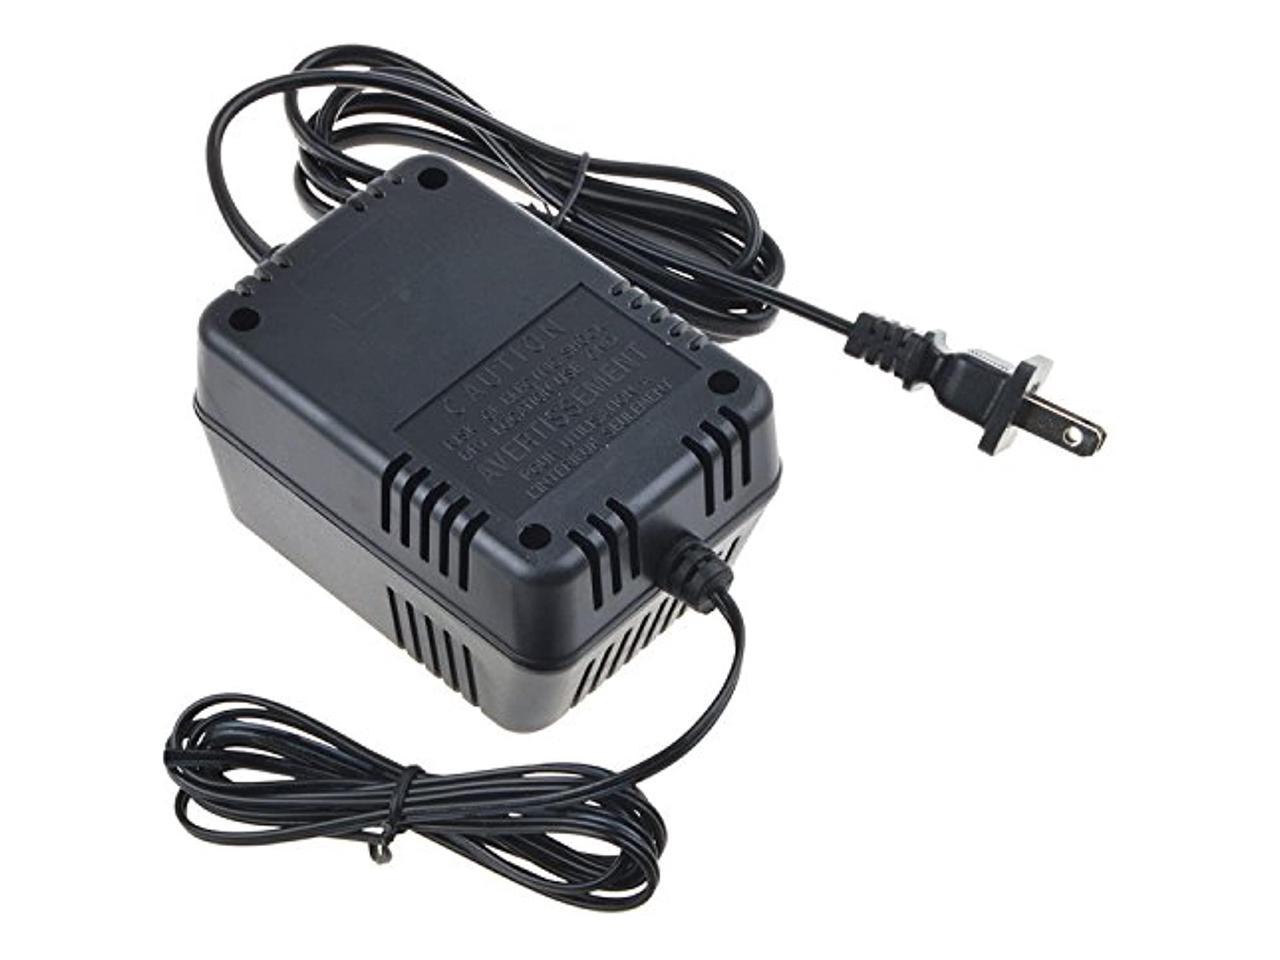 12V AC/AC Adapter for Model JT-12V1000 JT12V1000 Class 2 Transformer Finecom Multilink Changzhou Jutai Electronic Co 12VAC Power Unit Power Supply Cord Cable PS Charger Mains PSU 